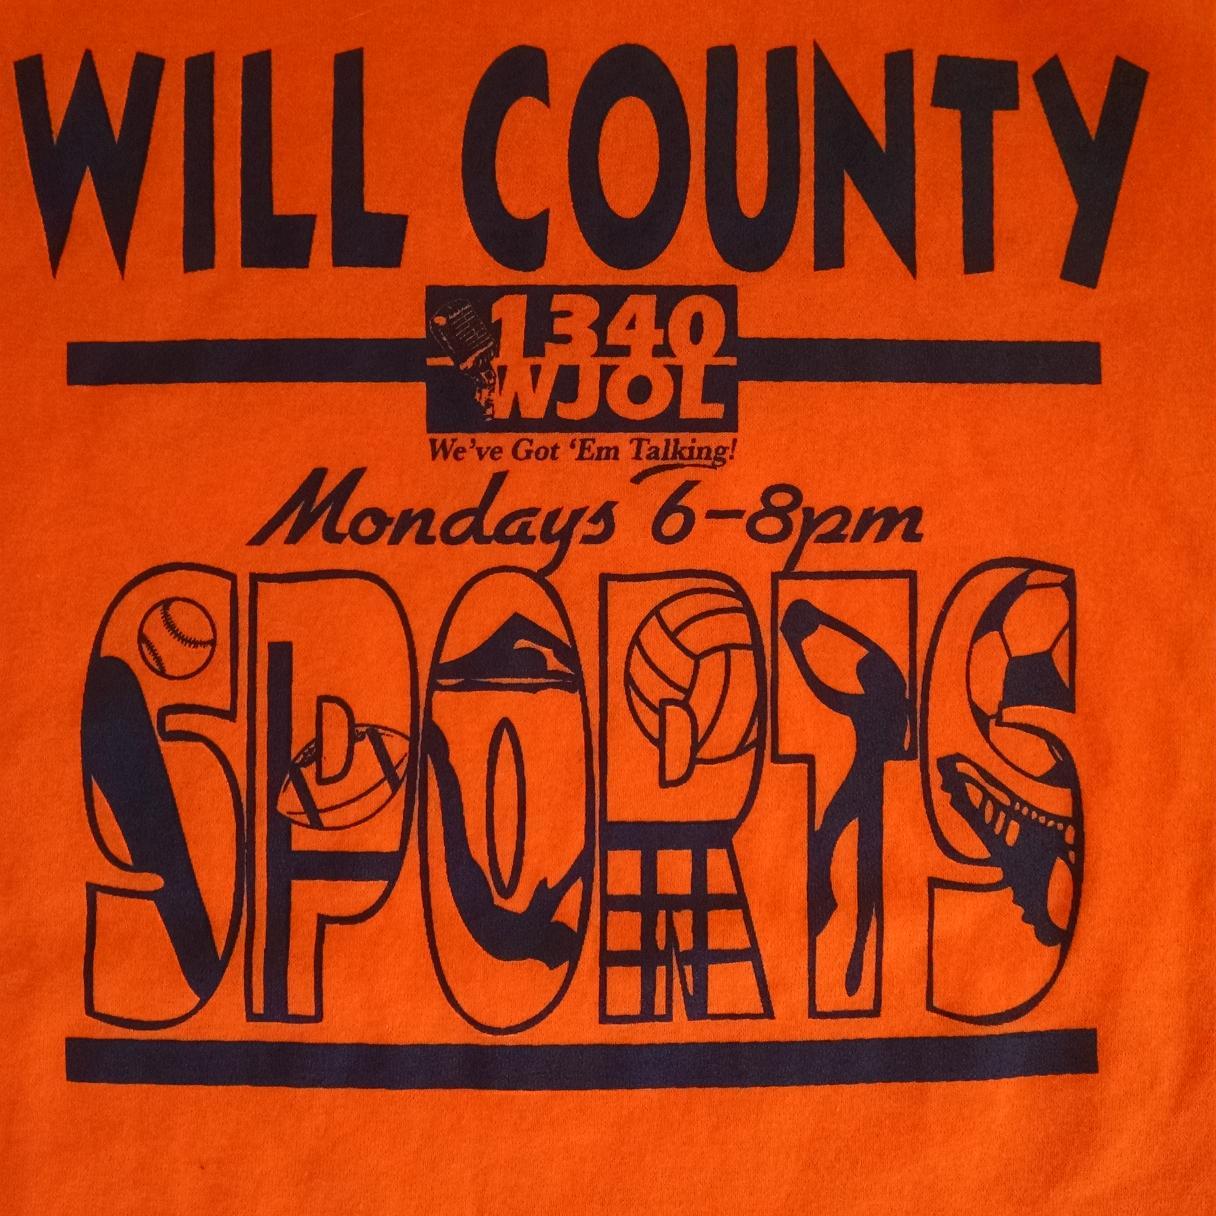 Former Host of Will County Sports on 1340 WJOL. Head X-Country/Track & Field coach at Joliet Junior College. Sports nut!! Supporter of ALL local sports.